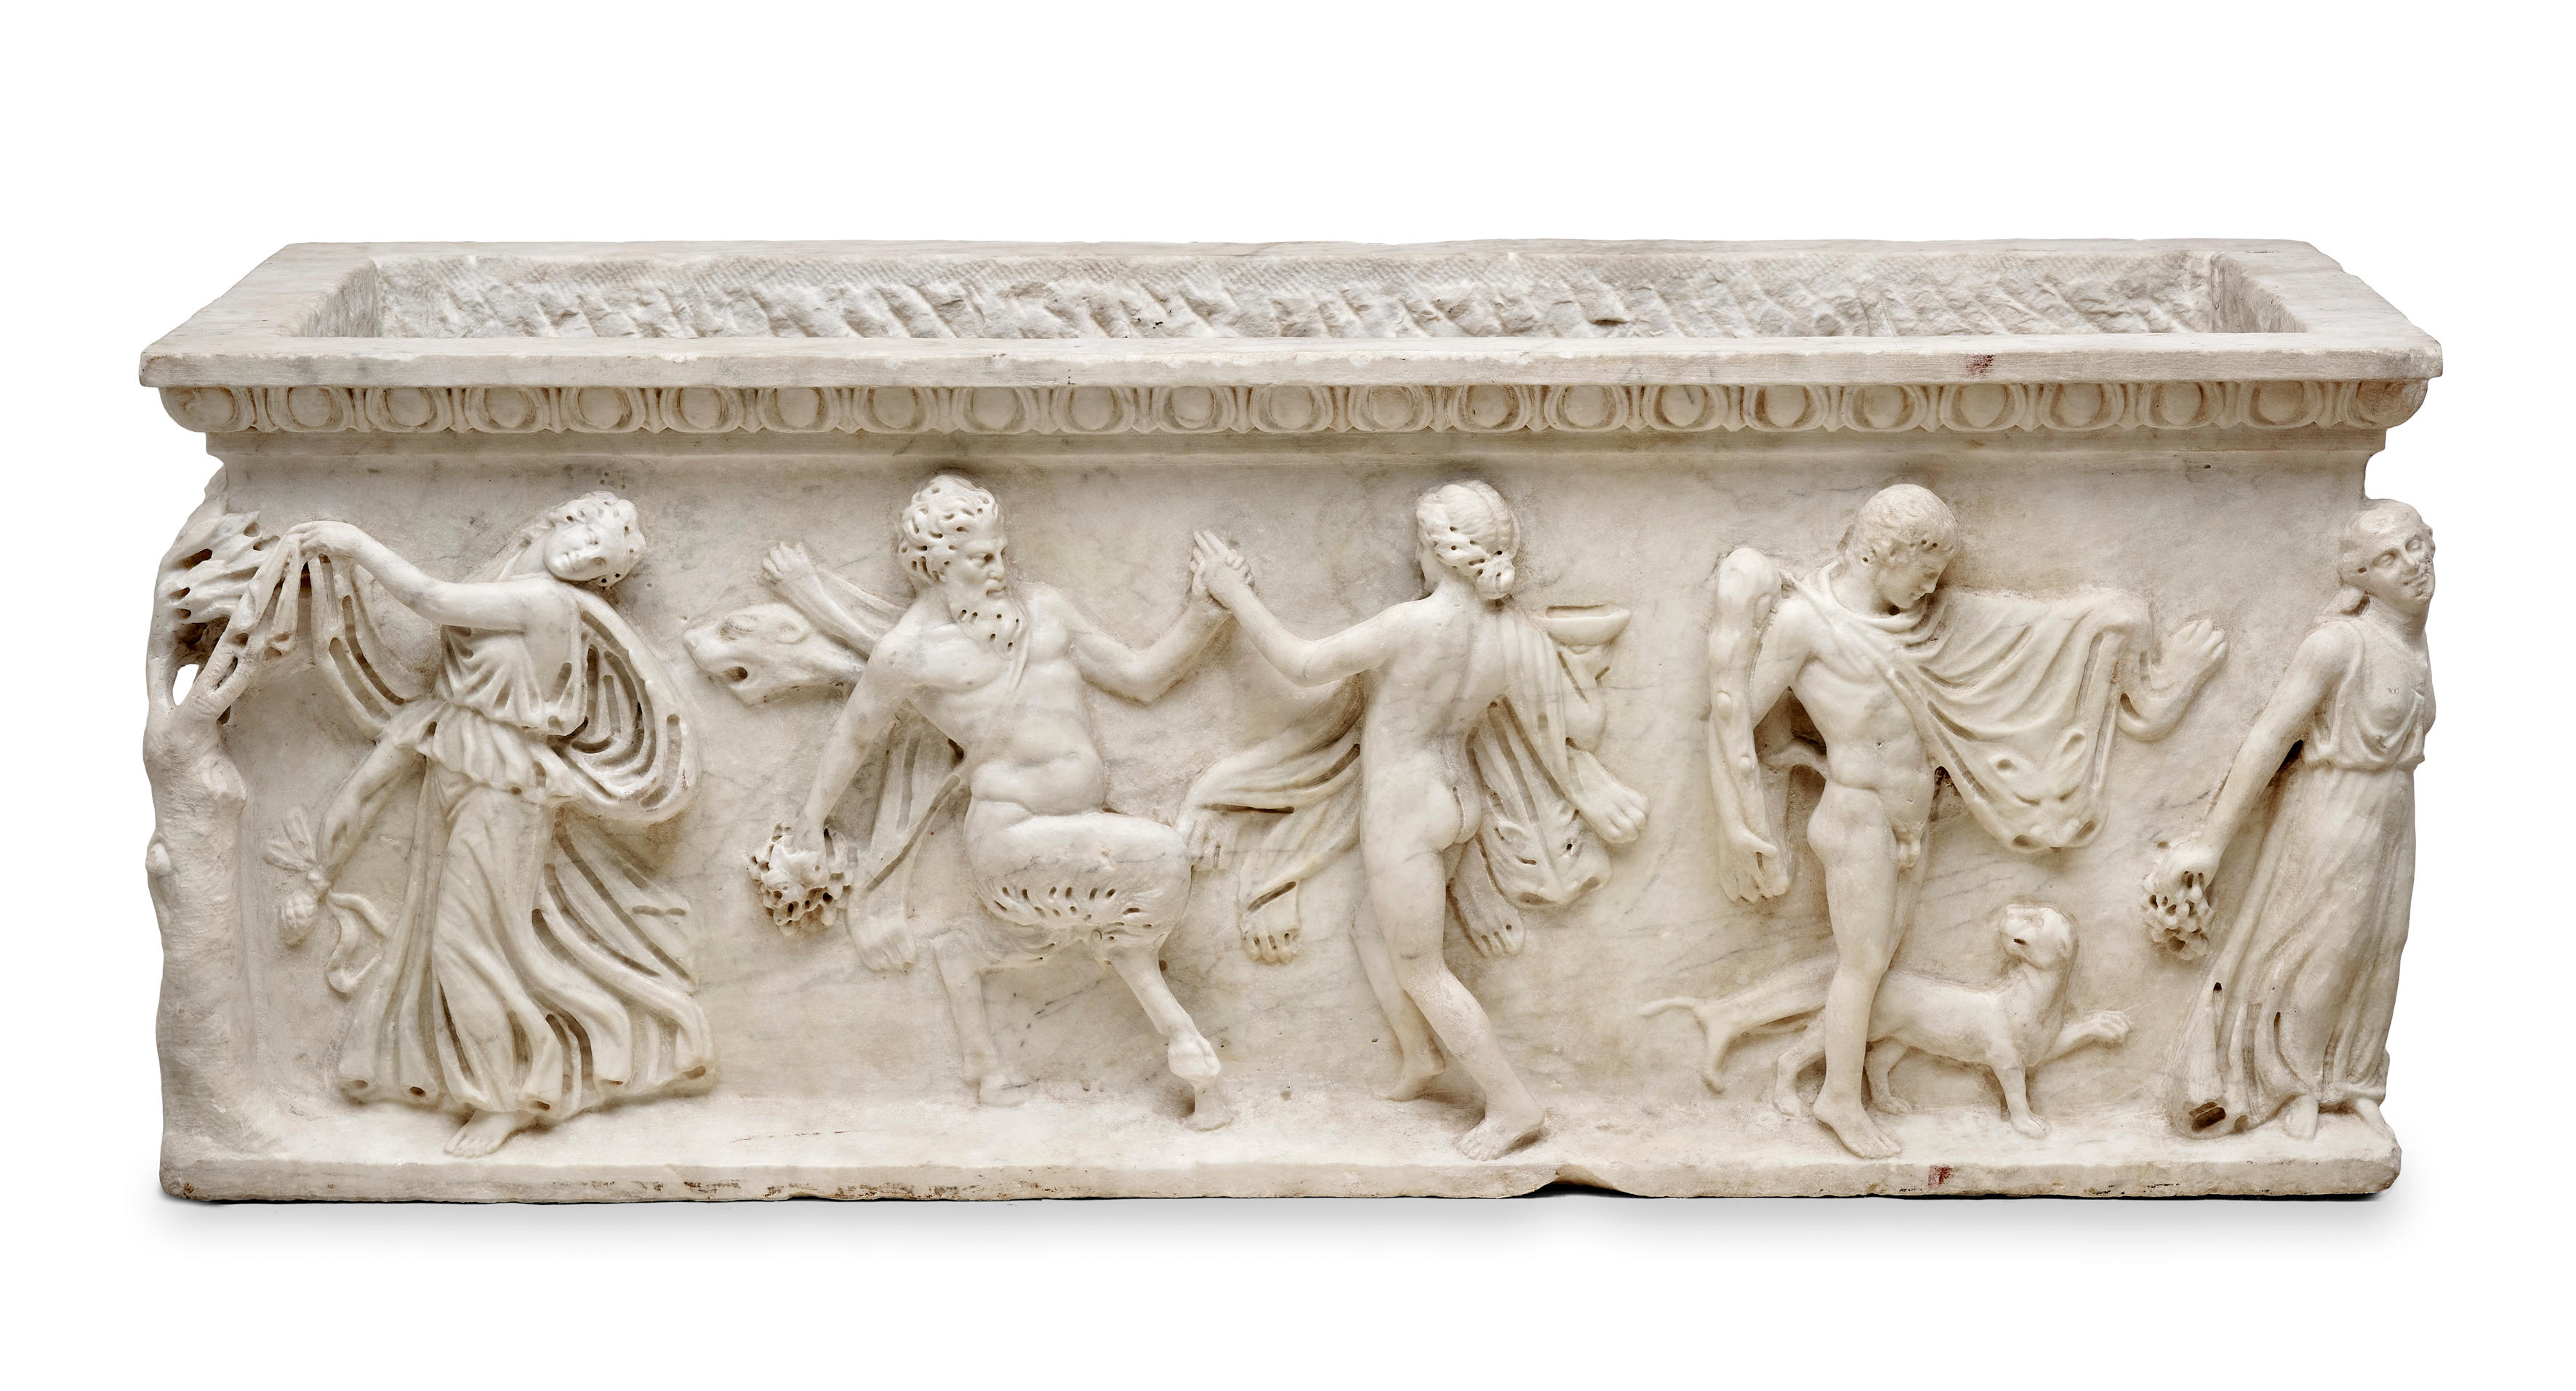 An Italian carved white marble jardinière, in the antique taste